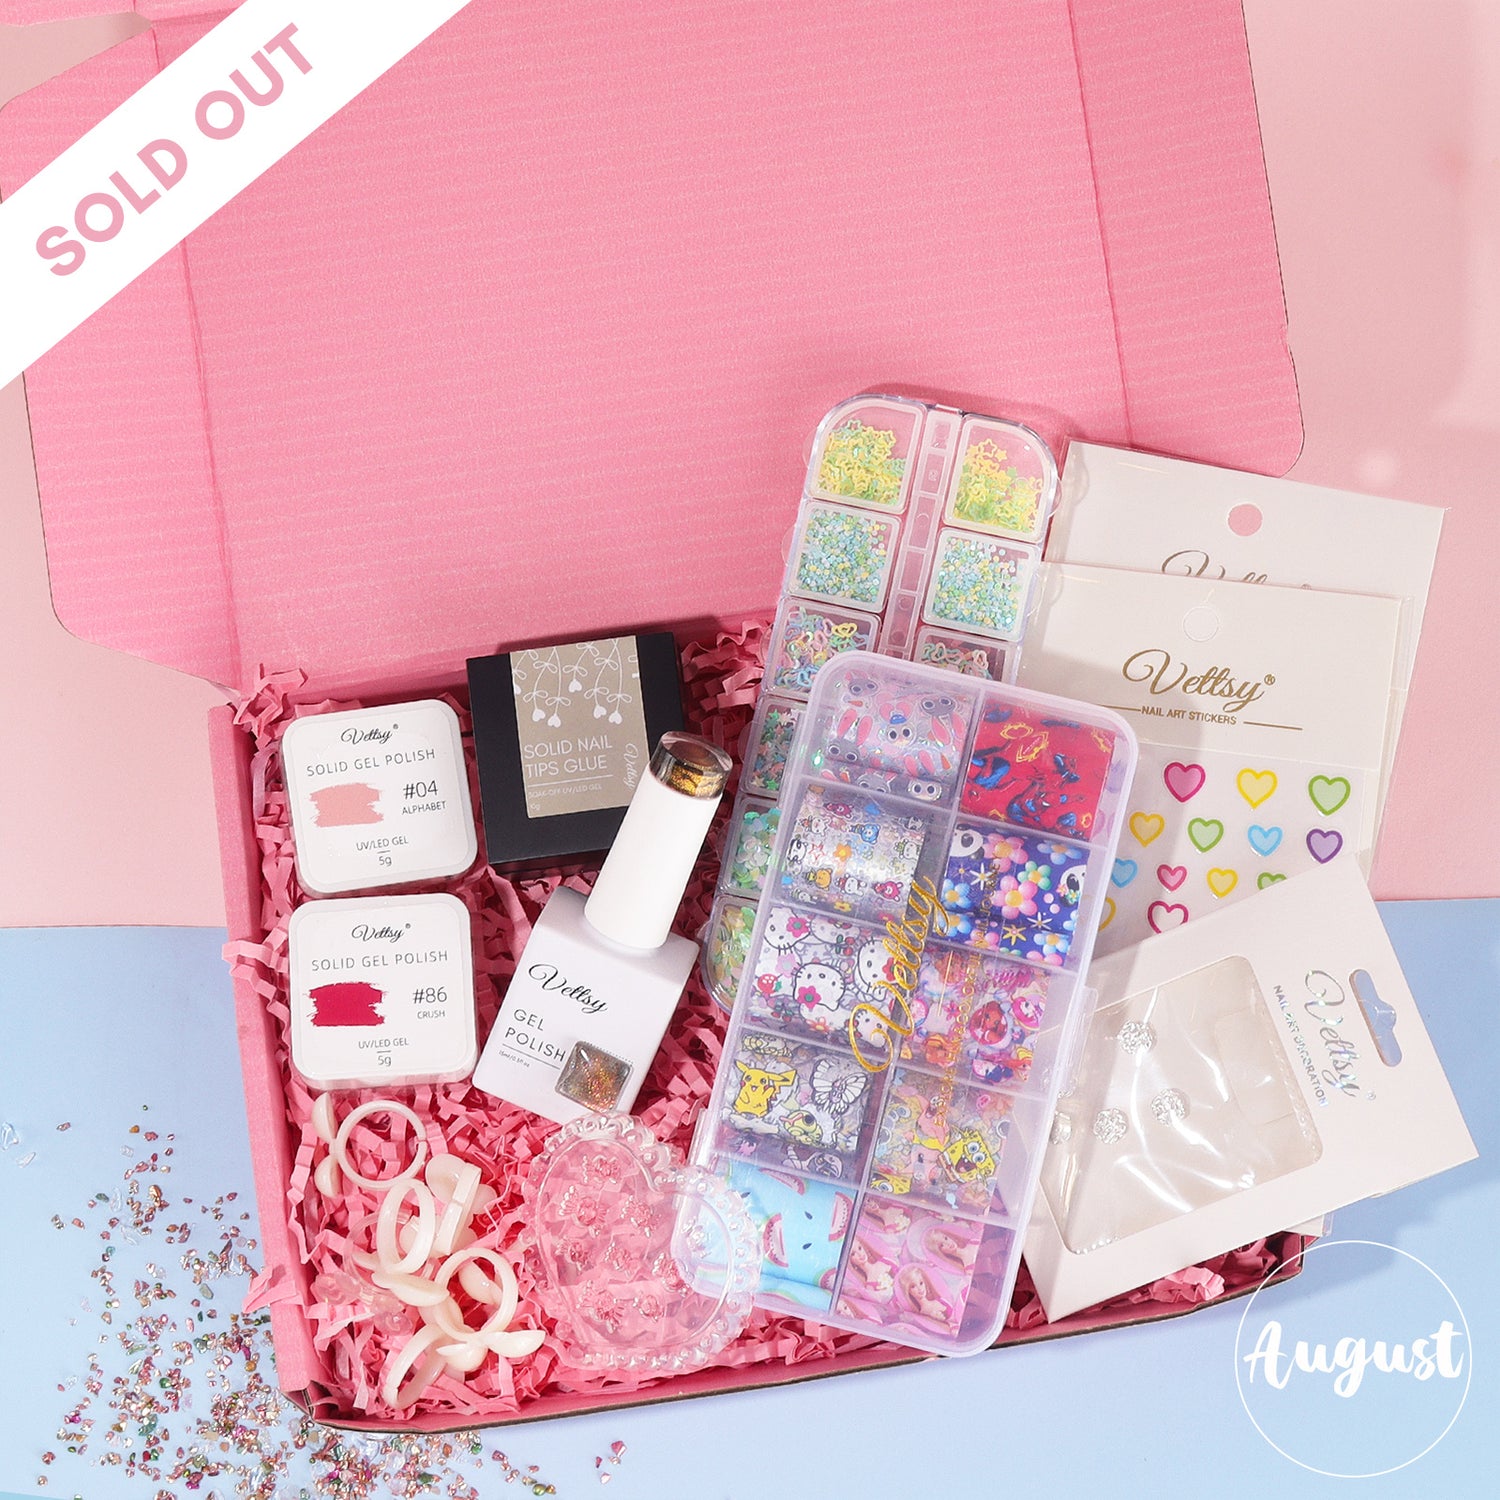 Monthly-Subscription-Nail-Art-mini-Box-august-sold-out